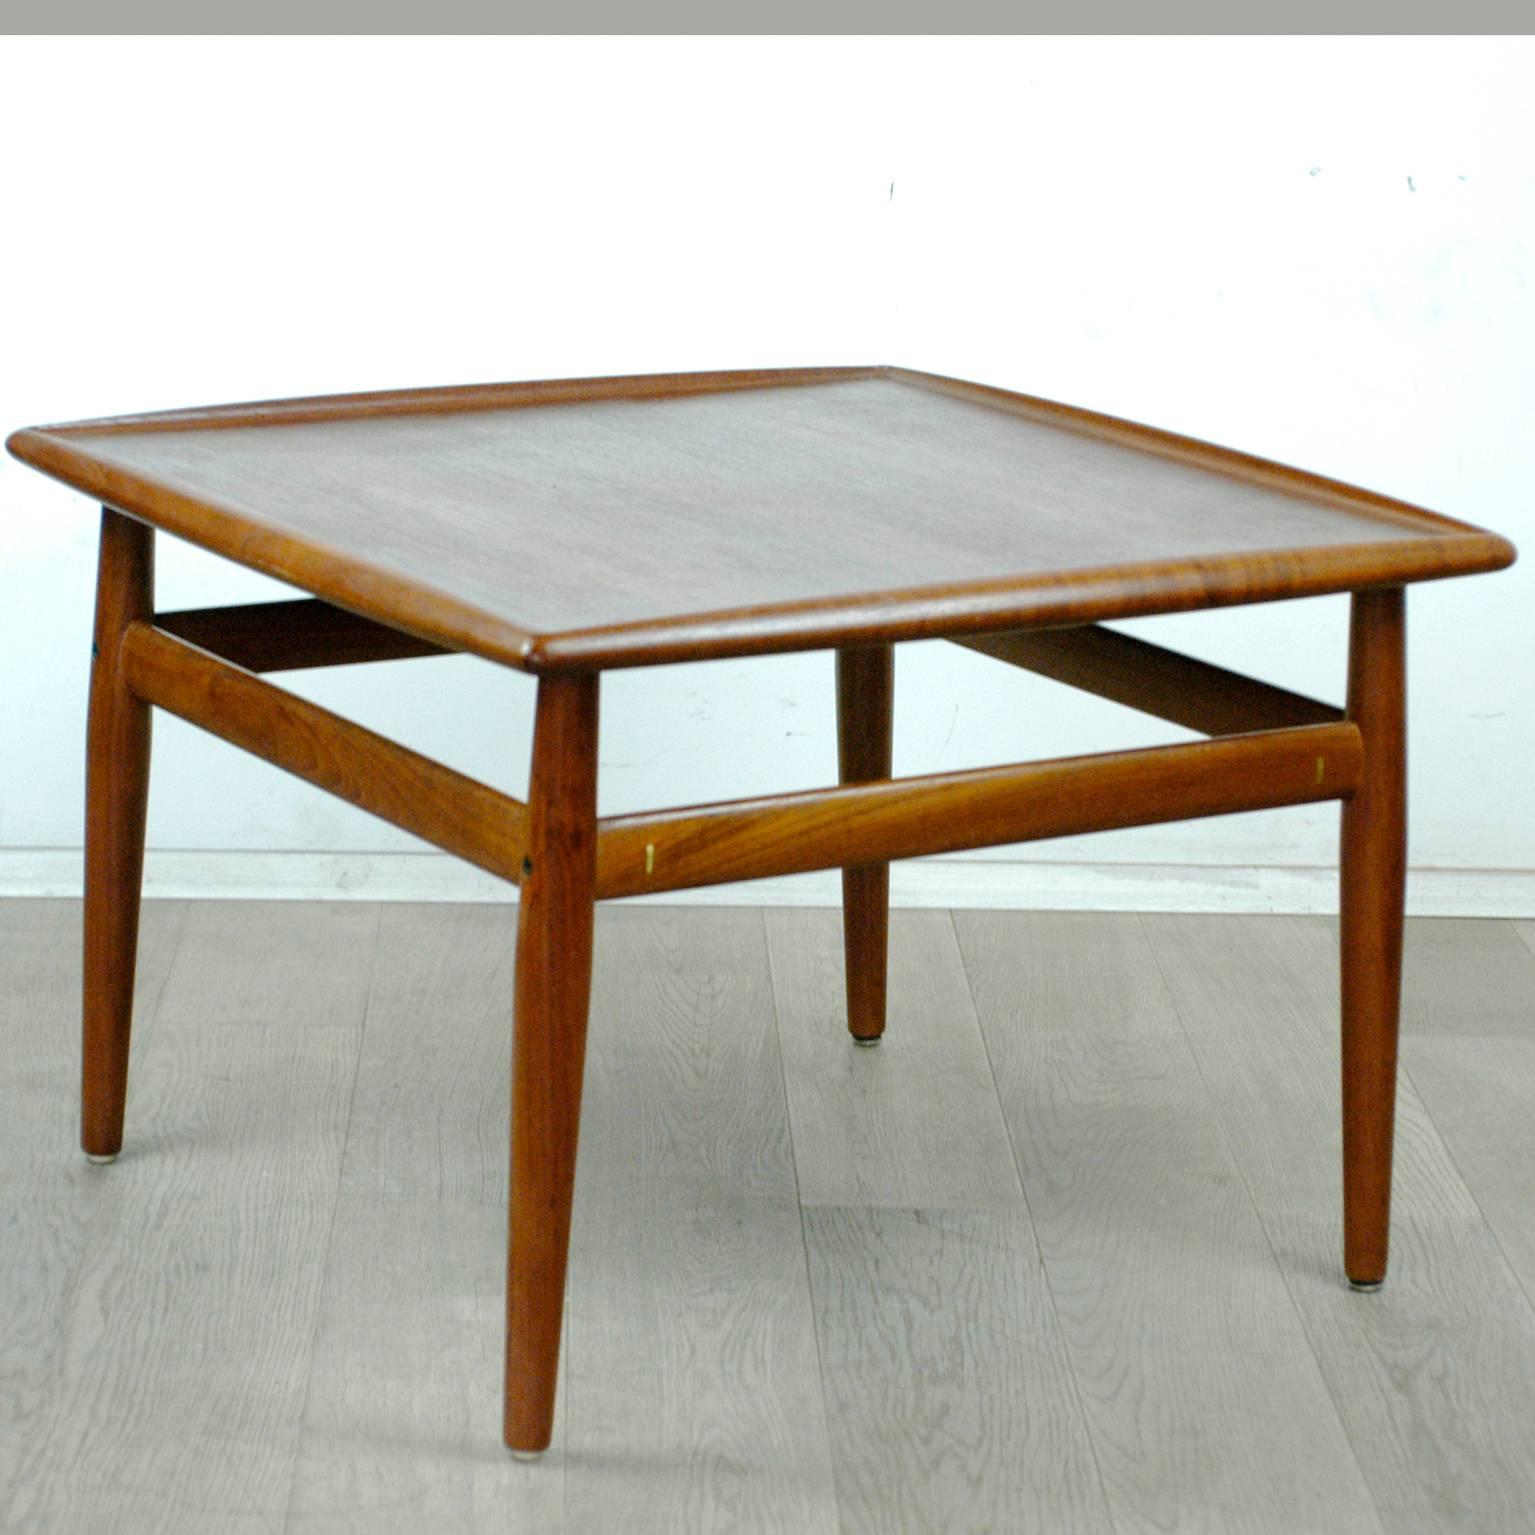 Excellent handcrafted Scandinavian Modern teak coffee table designed by Grete Jalk, with brass details, tabletop with beautiful grain.